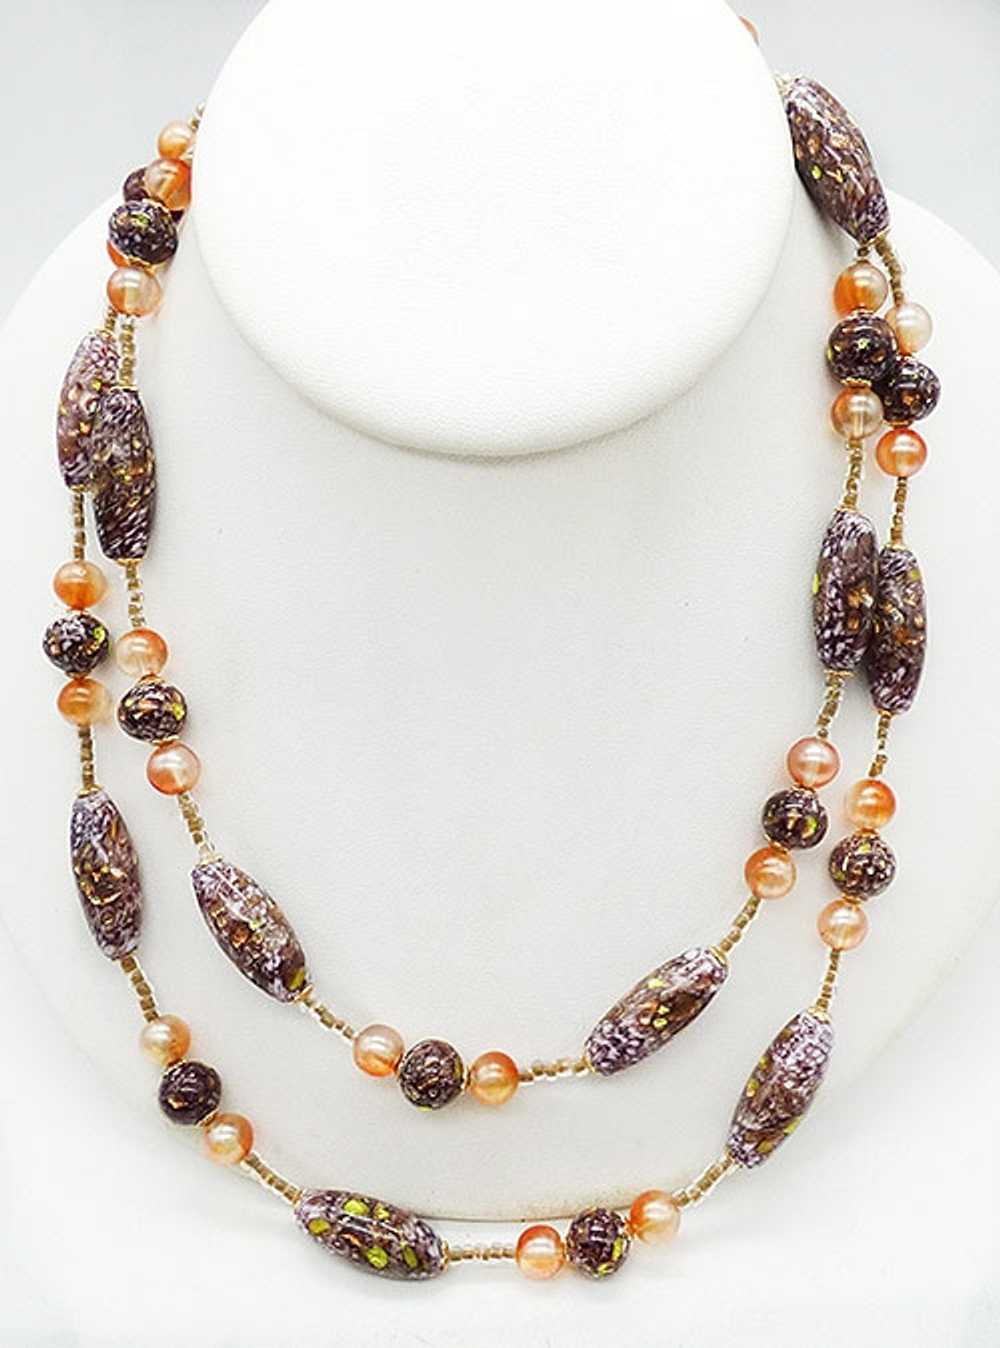 Venetian Gray Speckled Glass Bead Necklace - image 1